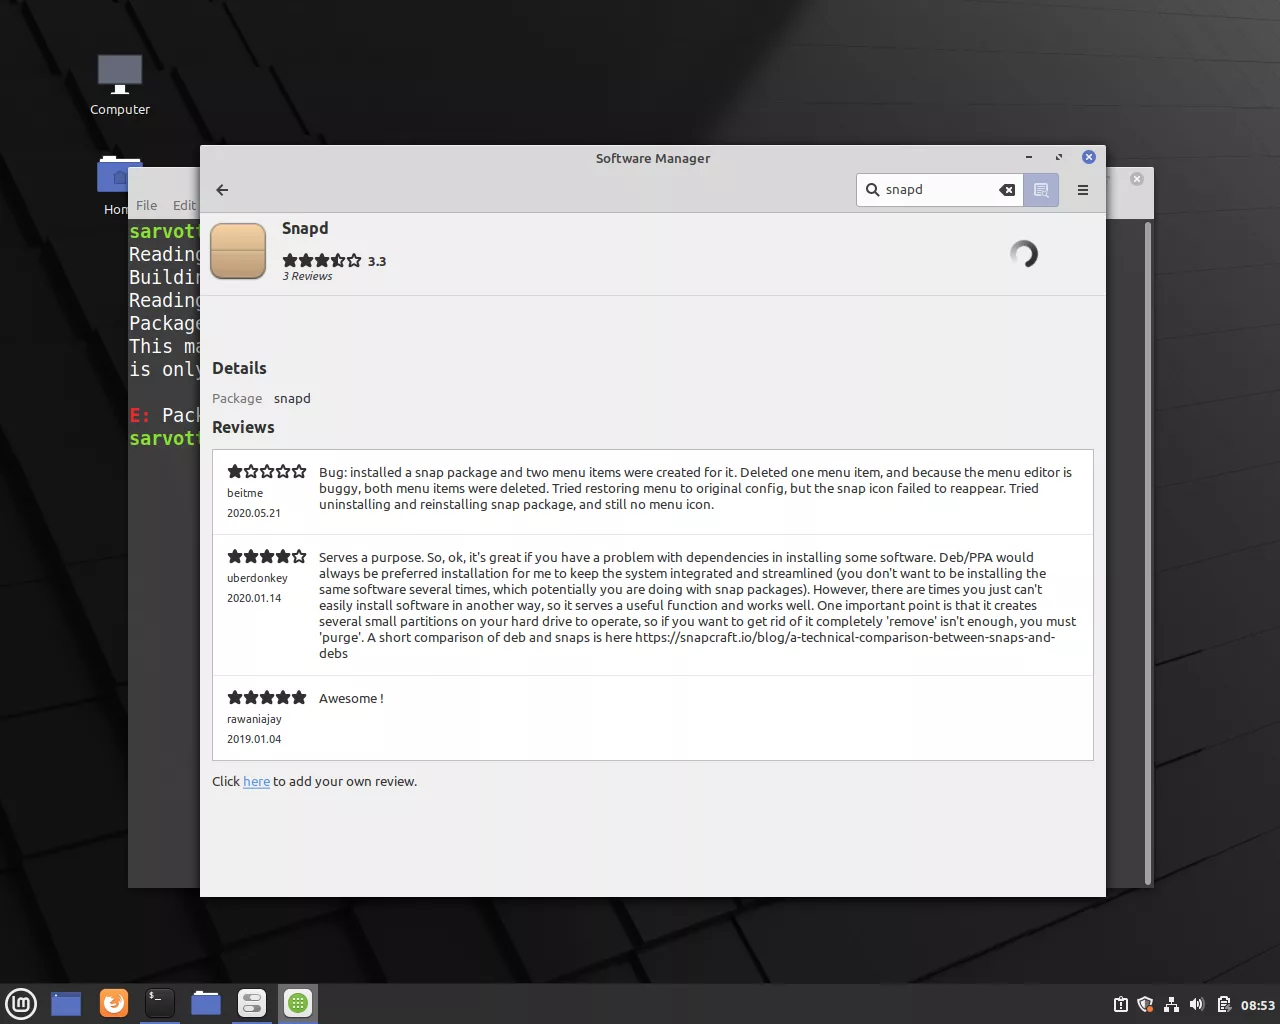 Linux Mint 20 — Installing snapd using software manager